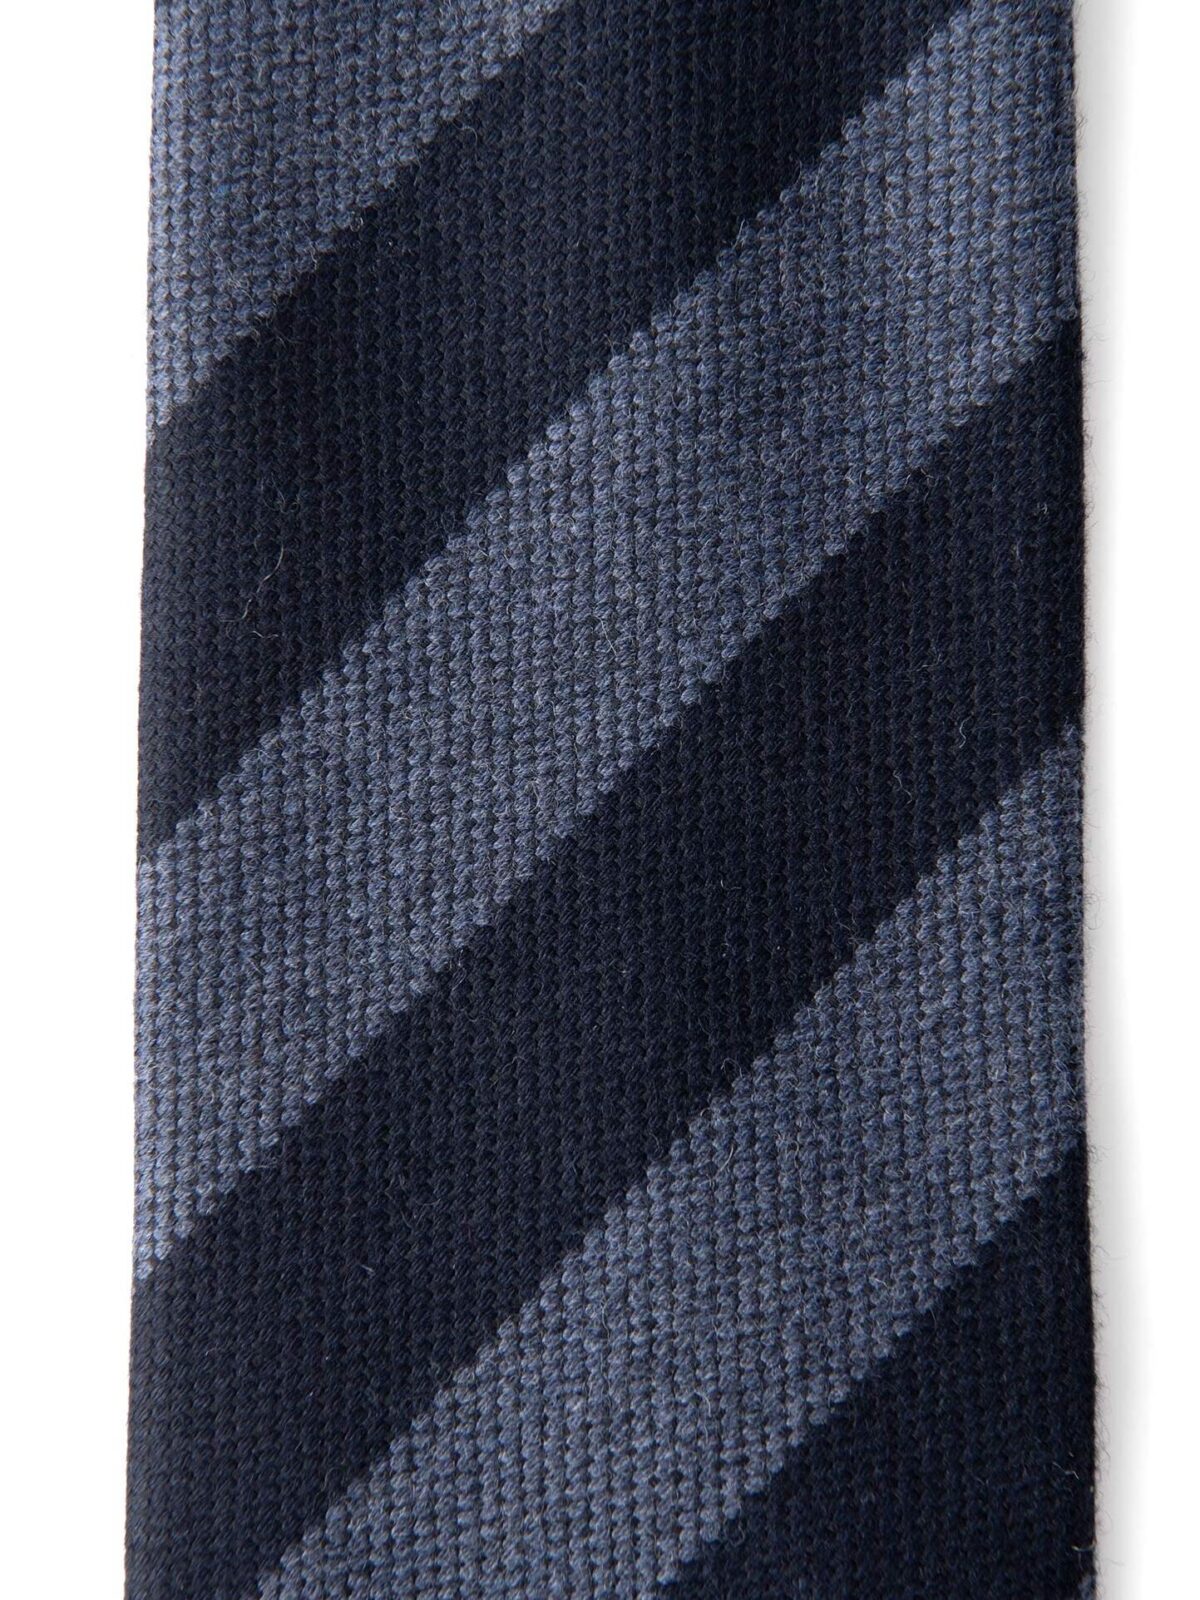 Navy and Light Blue Wool and Silk Striped Tie